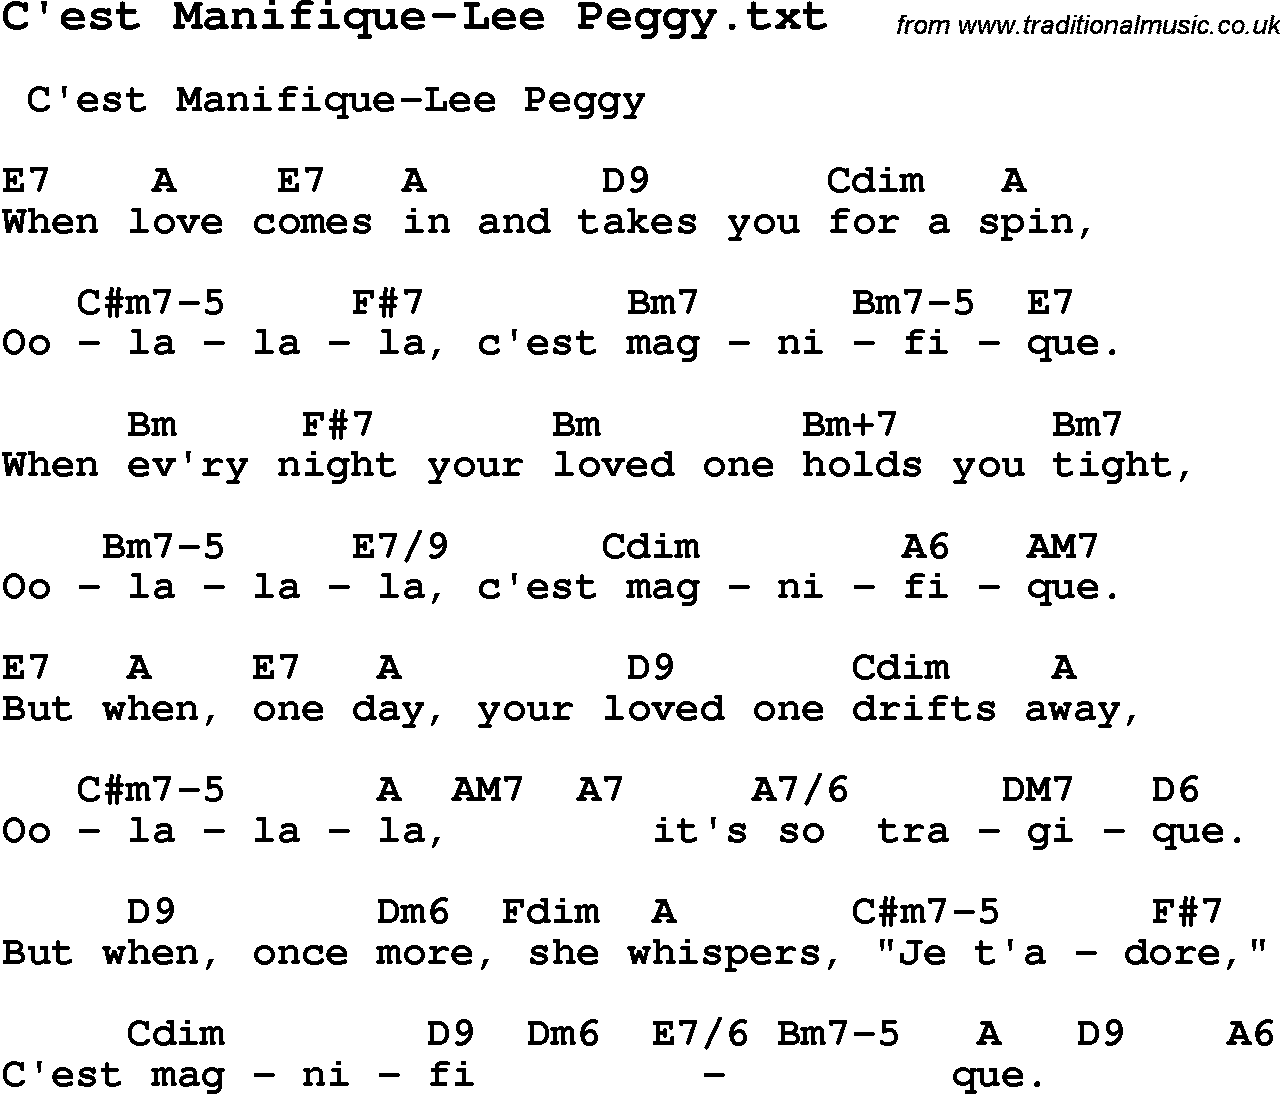 Jazz Song from top bands and vocal artists with chords, tabs and lyrics - C'est Manifique-Lee Peggy